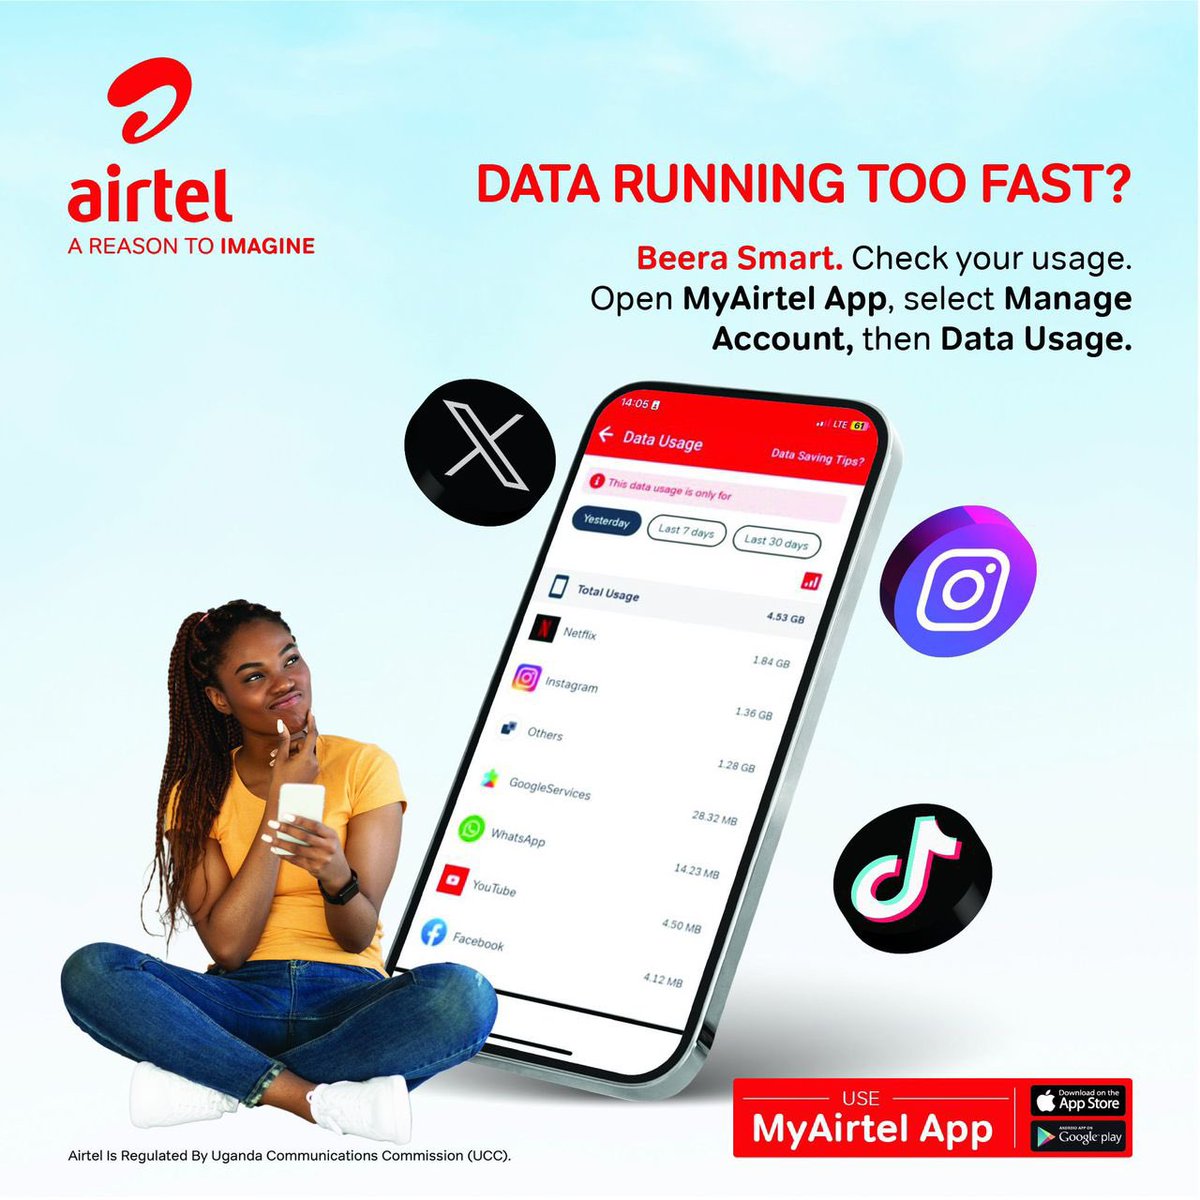 Manage your data effortlessly with the Data Usage feature on the #MyAirtel App. Download now at airtelafrica.onelink.me/cGyr/qgj4qeu2 and get started. #AirtelDataManager